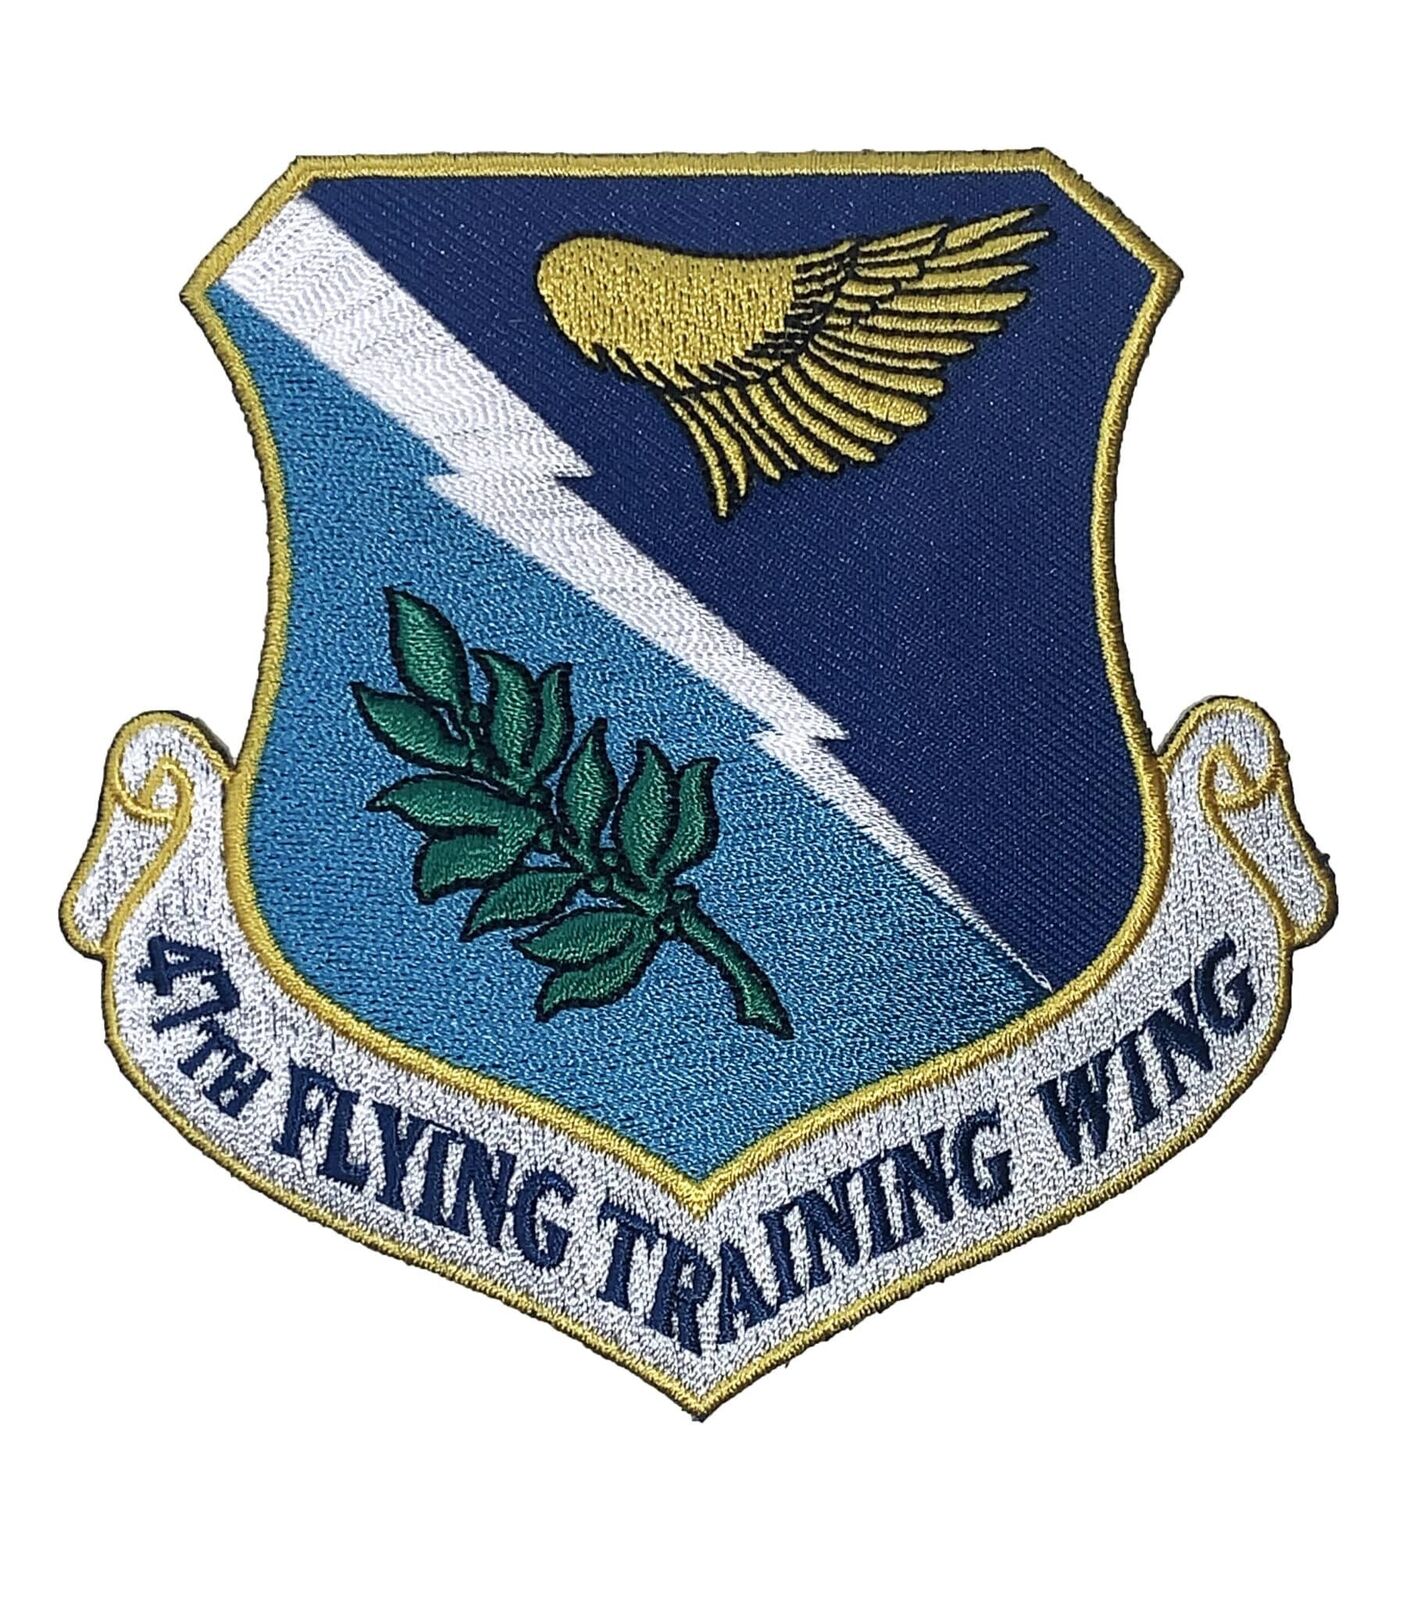 47th Flying Training Wing Patch – Plastic Backing